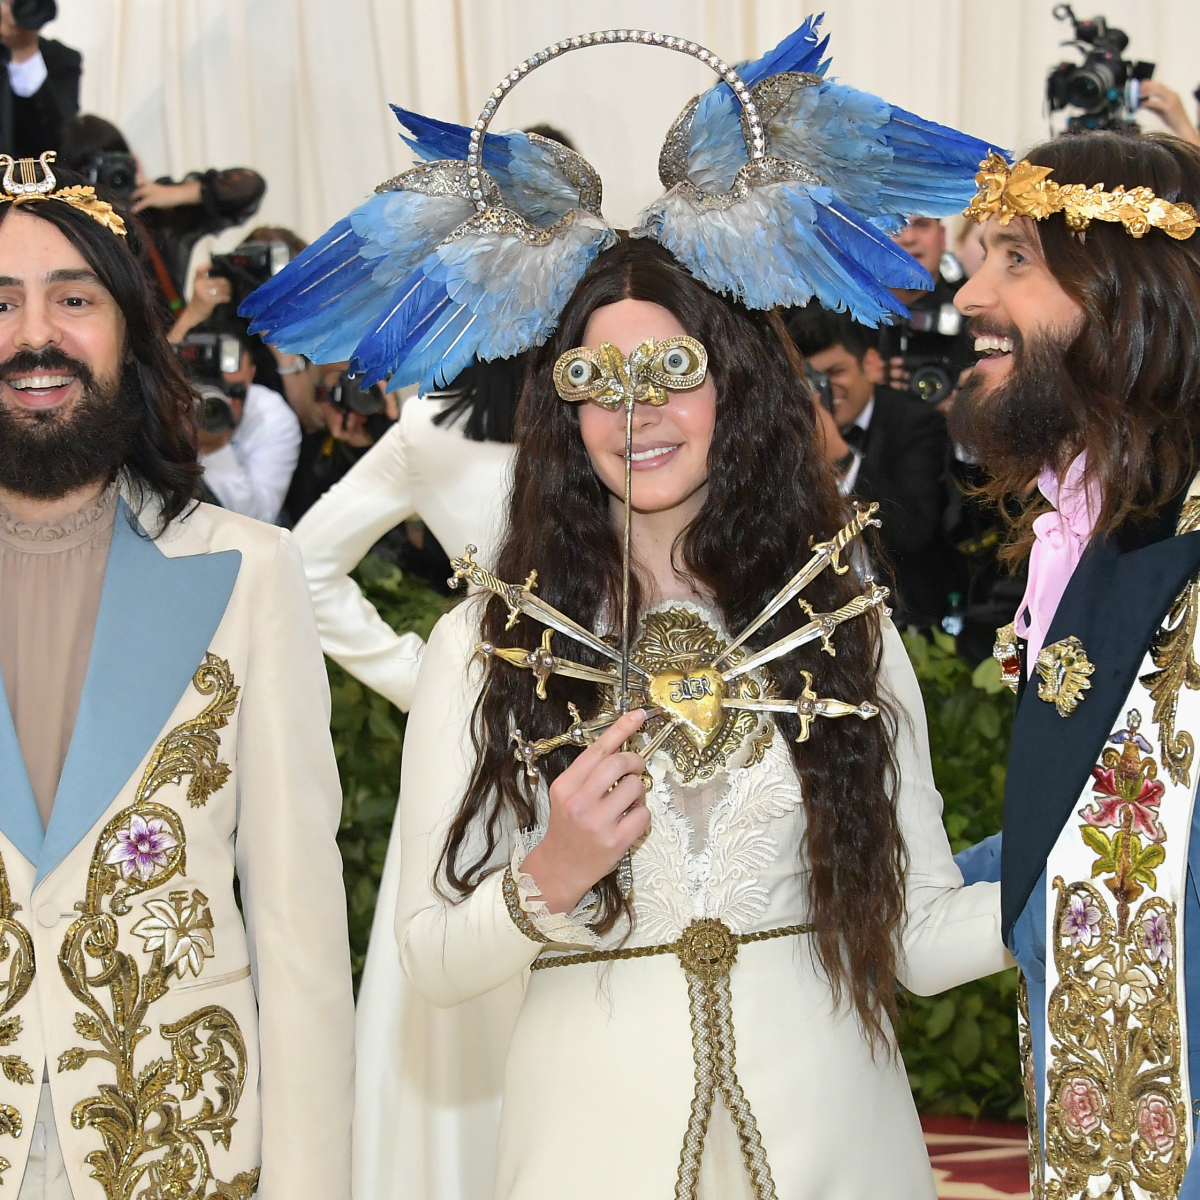 Read: Gucci to Met Gala After Party Uptown Gym, The Financial Future of Chanel -